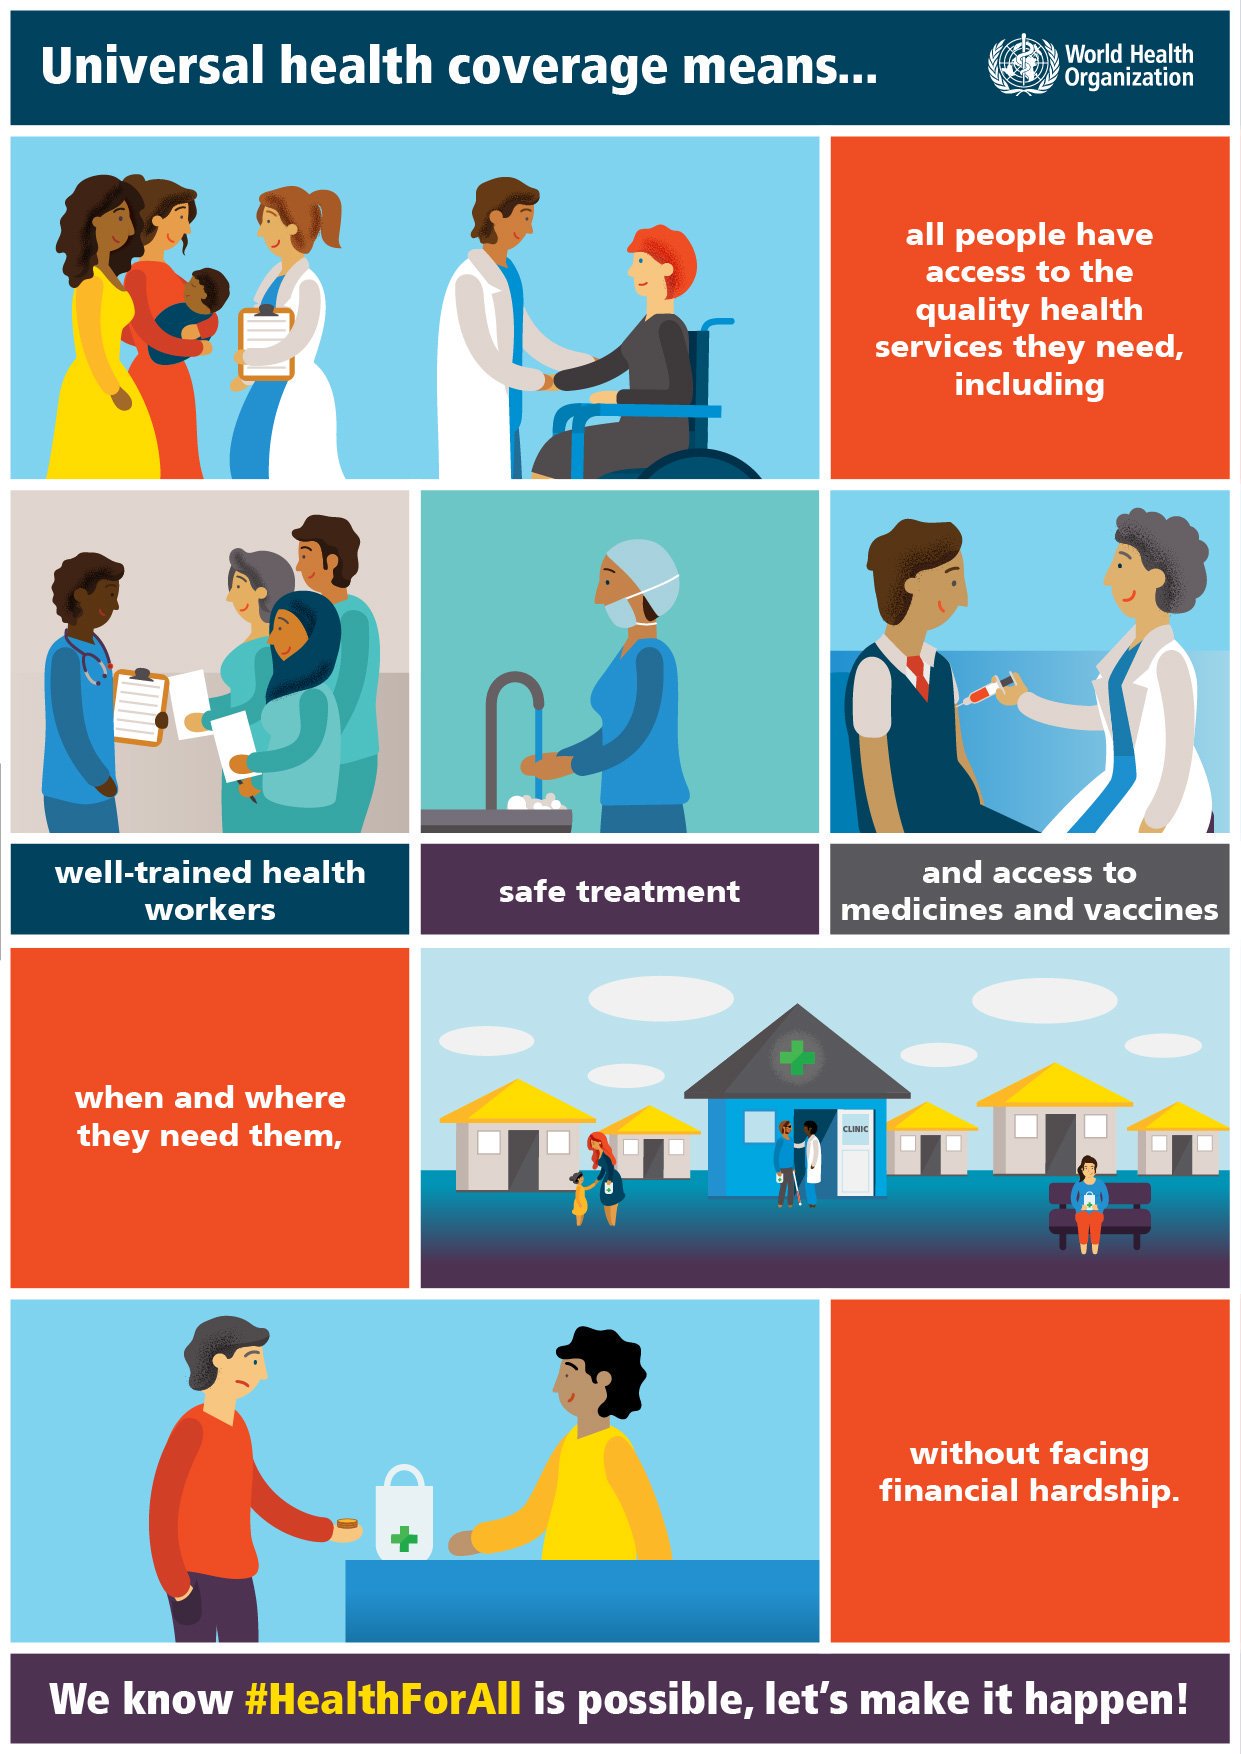 Graphic on universal health coverage interventions includes safe treatment which includes handwashing